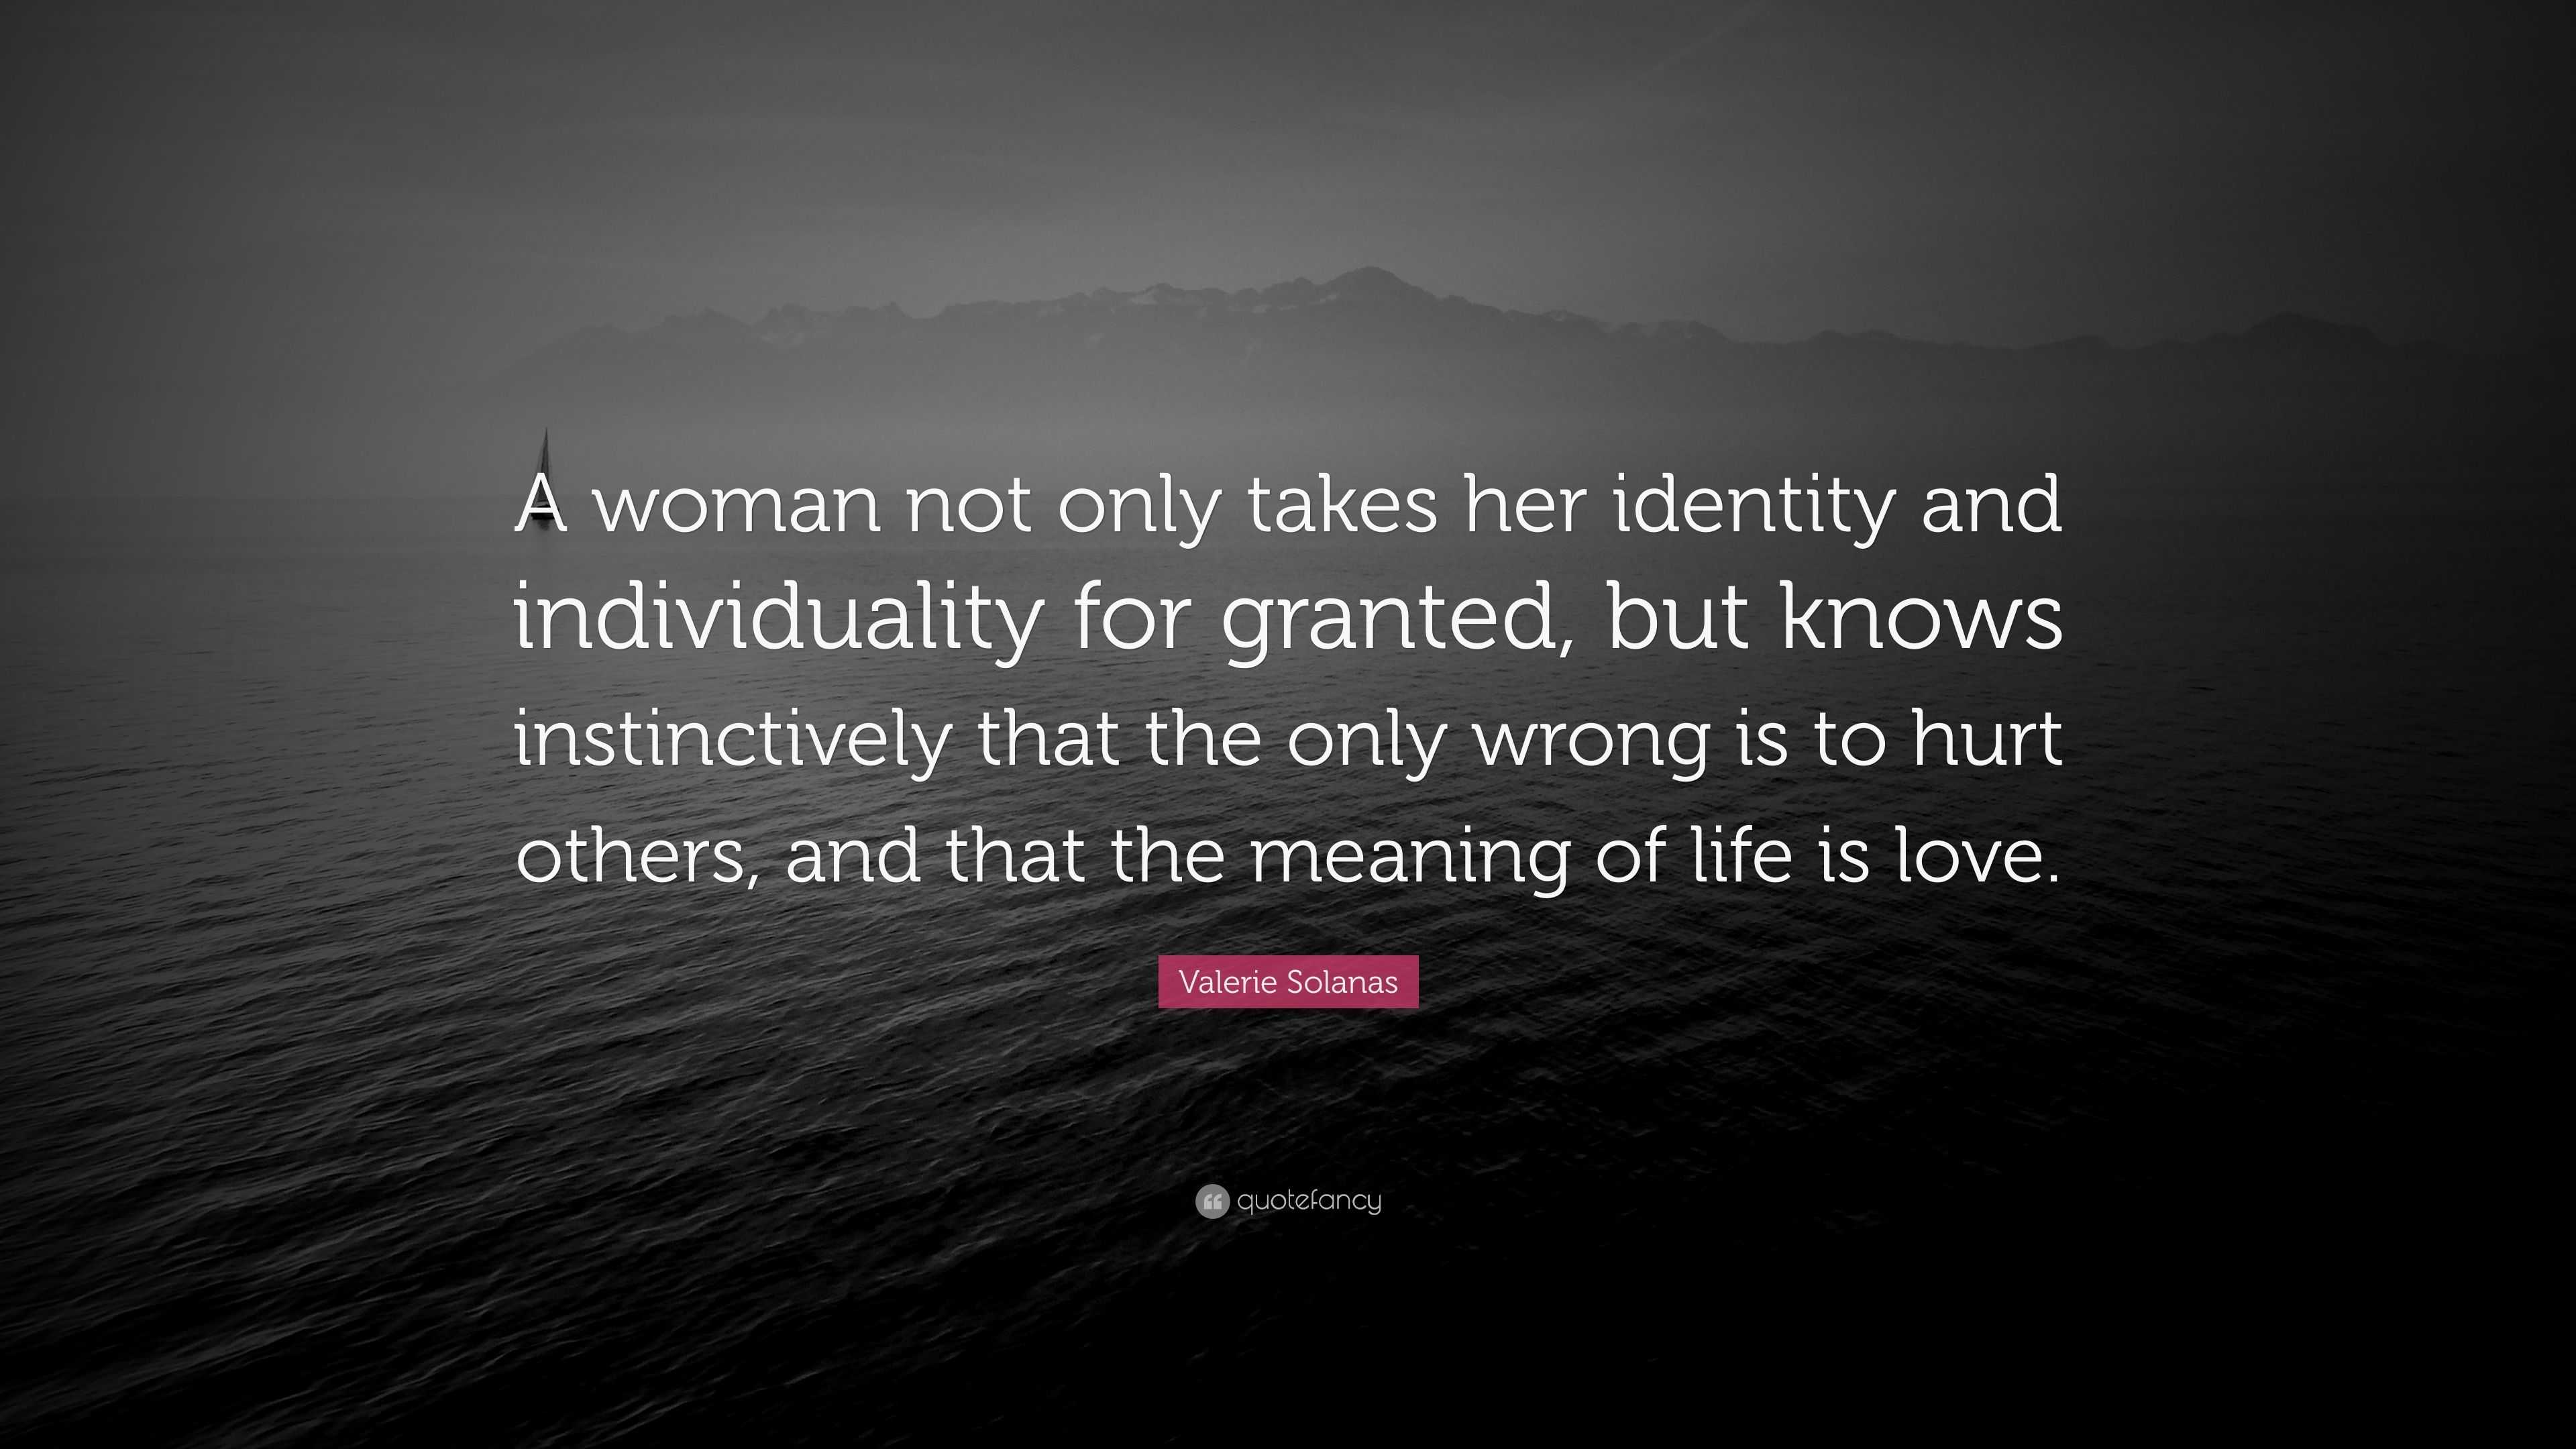 Valerie Solanas Quote: “A woman not only takes her identity and ...